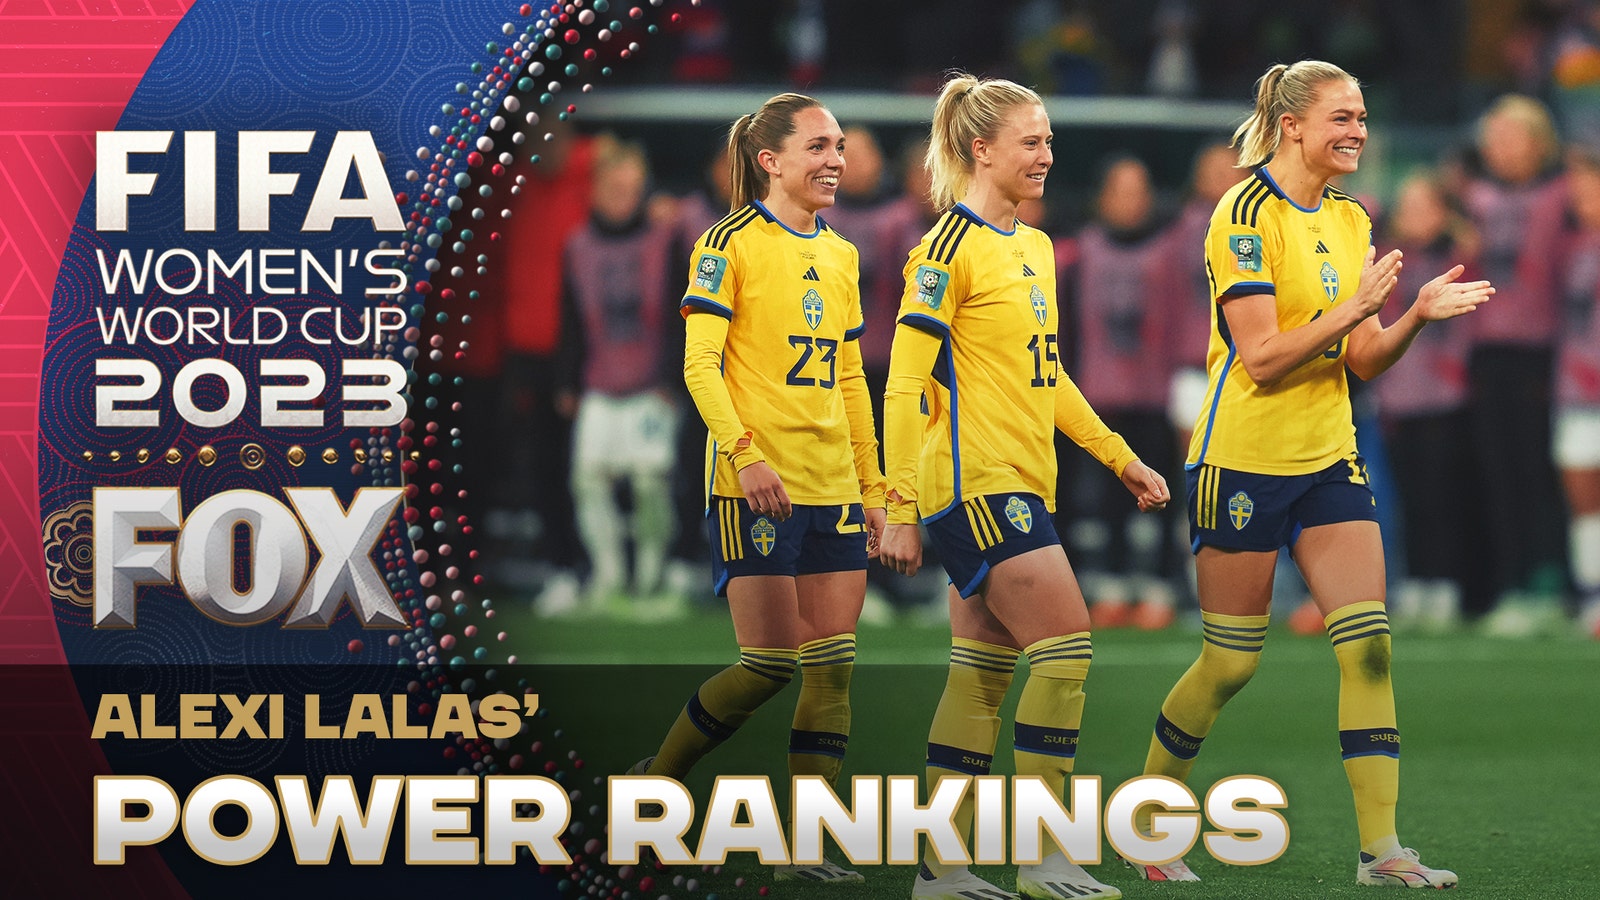 Alexi Lalas' power rankings ft. Japan, Spain and Sweden| 2023 FIFA Women's World Cup